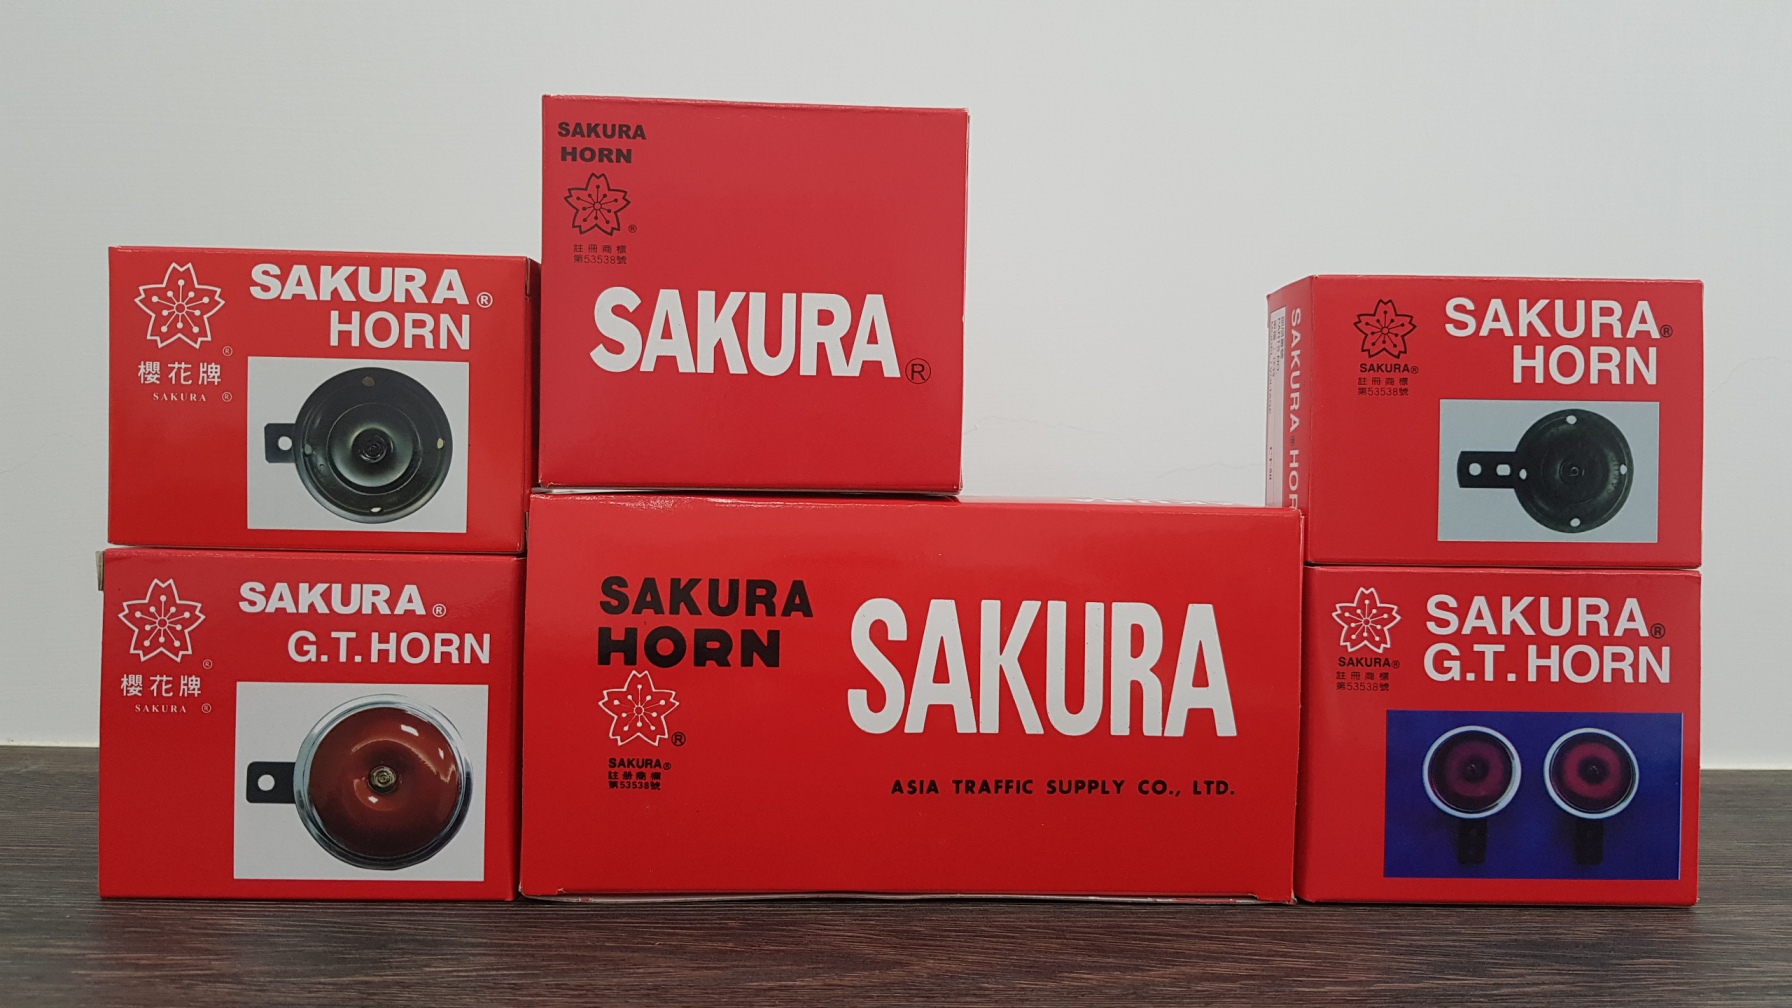 Please recognize SAKURA HORN red package.